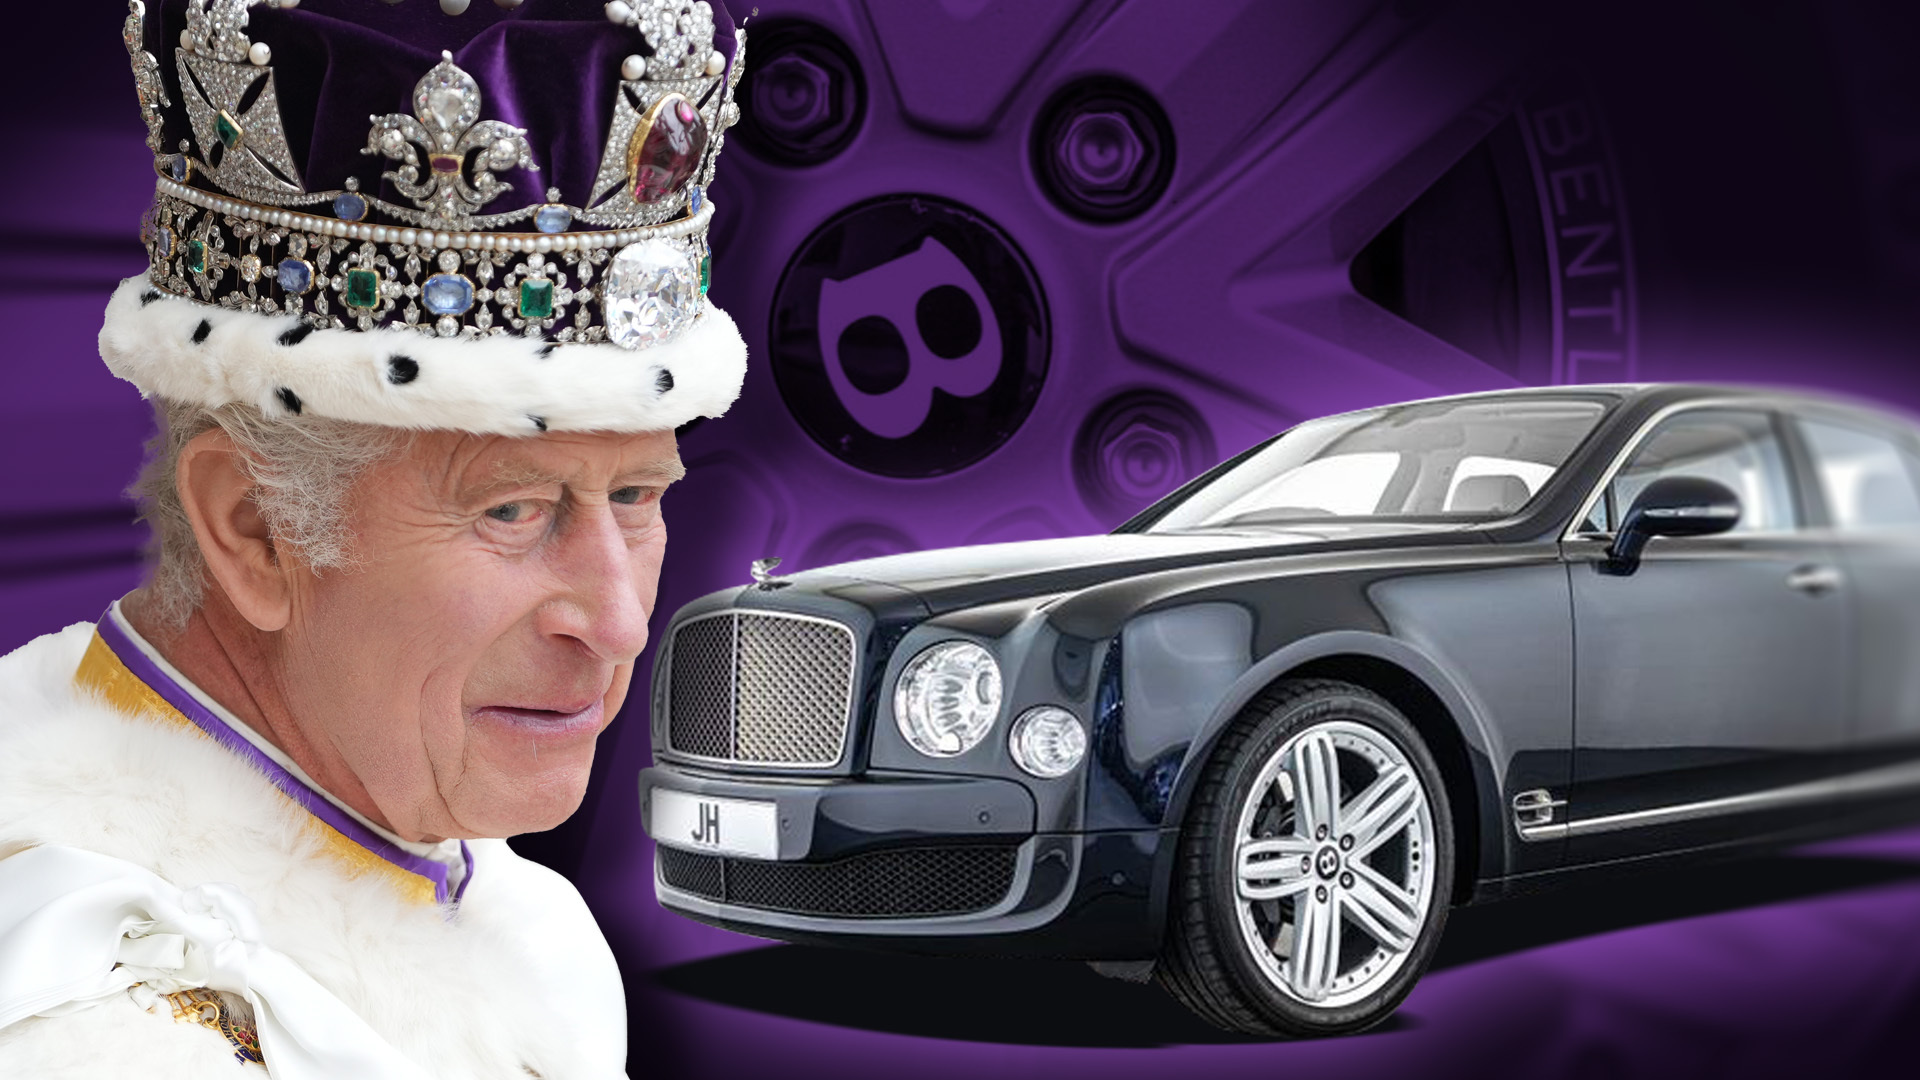 Ranking Top Luxury Cars Fit for a King's Coronation